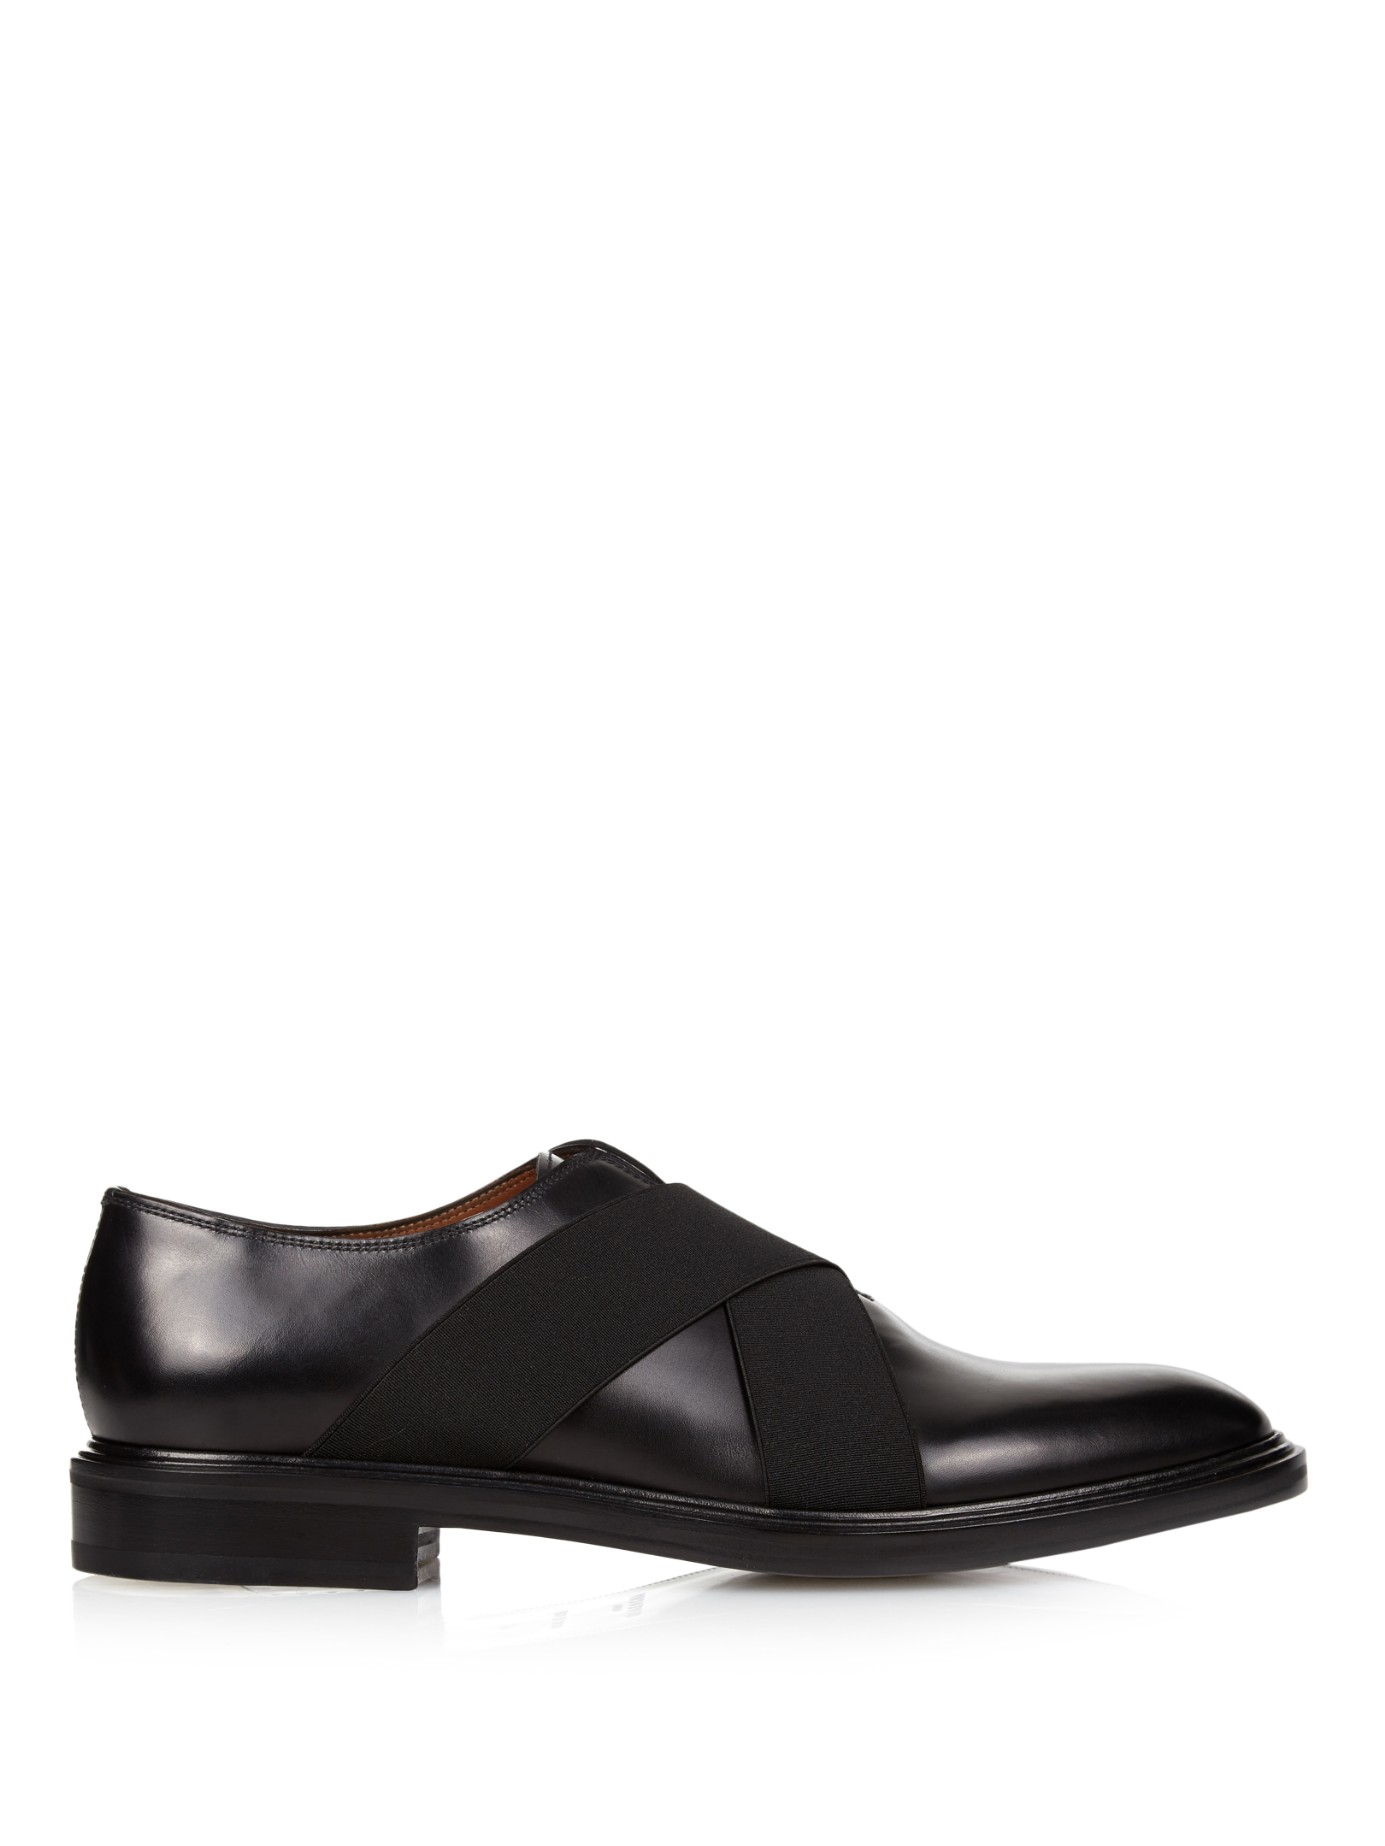 Lyst - Givenchy Elastic-Straps Leather Derby Shoes in Black for Men